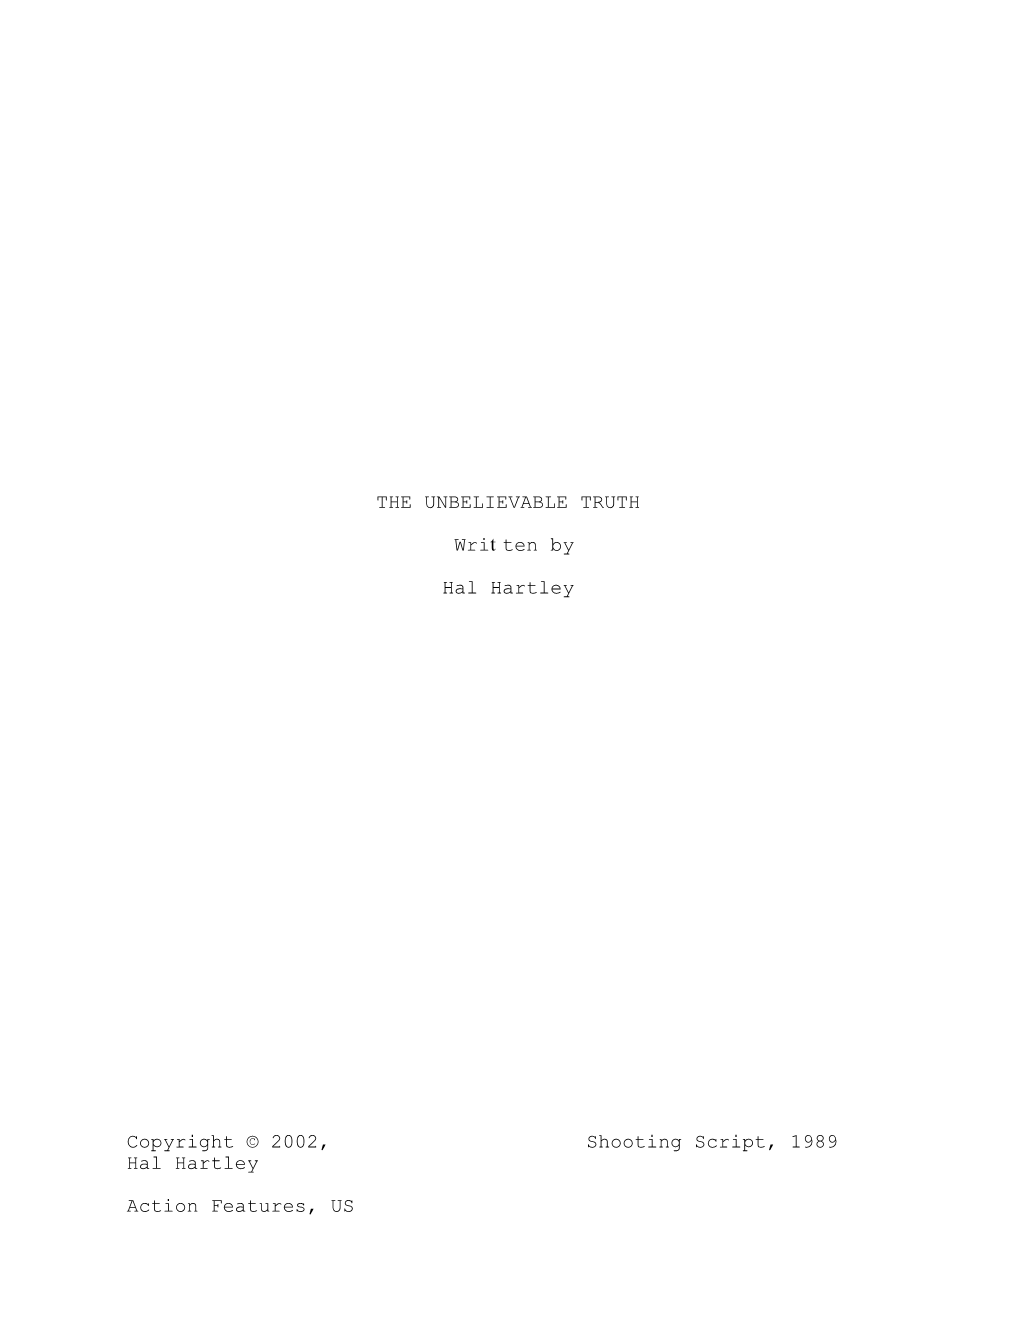 THE UNBELIEVABLE TRUTH Written by Hal Hartley Shooting Script, 1989 Copyright © 2002, Hal Hartley Action Features, US